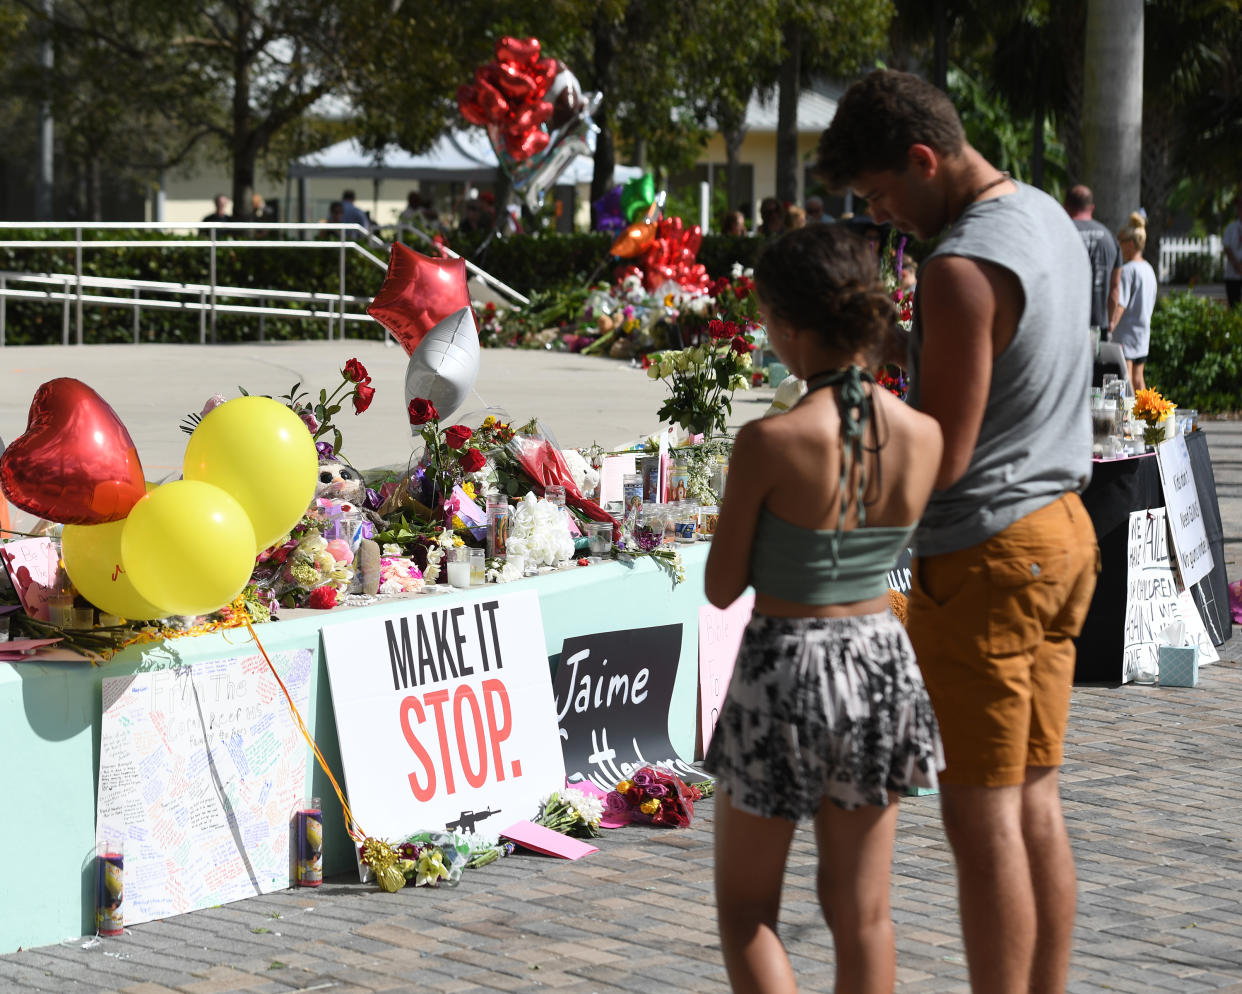 The community gathers to pay its respects to the shooting victims at Marjory Stoneman Douglas High School in Parkland, Fla. (Photo: mpi04/MediaPunch/IPX)